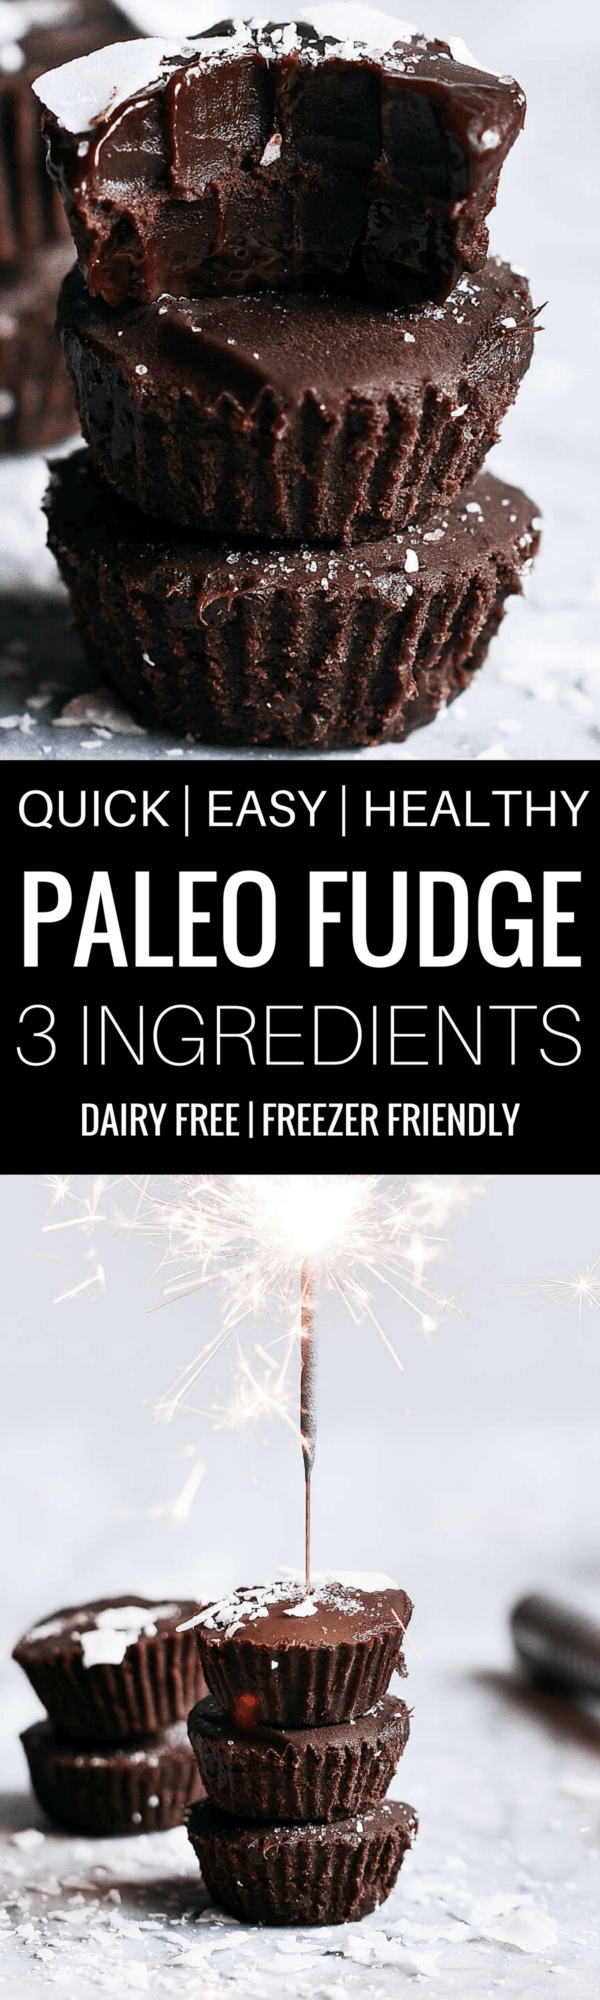 Ready for some chocolate goodness?! These easy paleo treats are deliciously rich and creamy. Made without dairy, these fudge bites